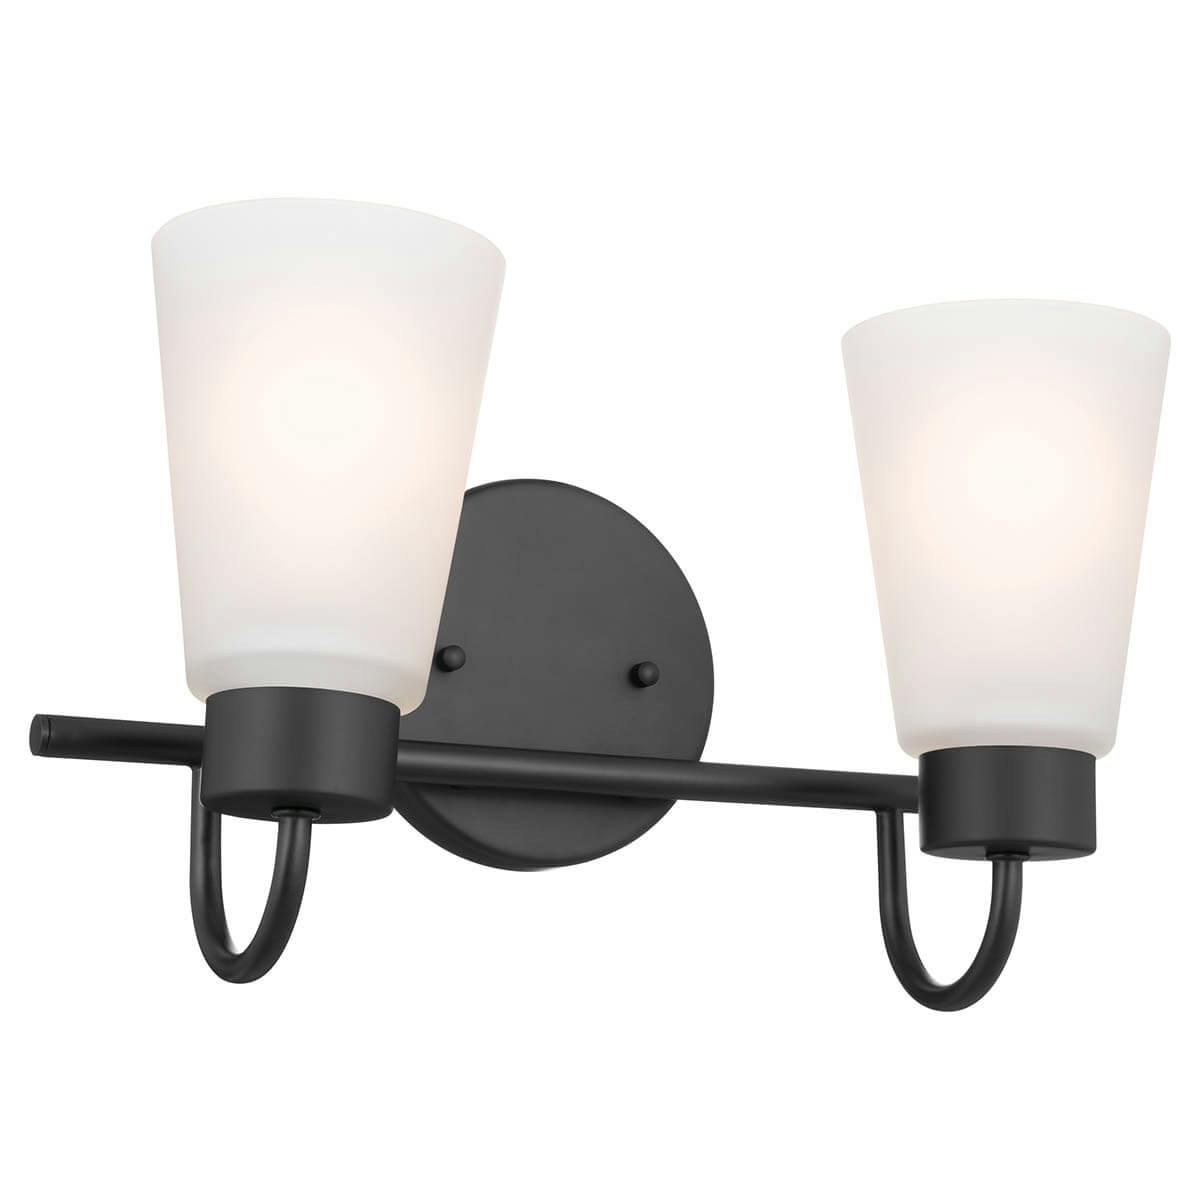 The Erma 14" 2 Light Vanity Light Black facing up on a white background